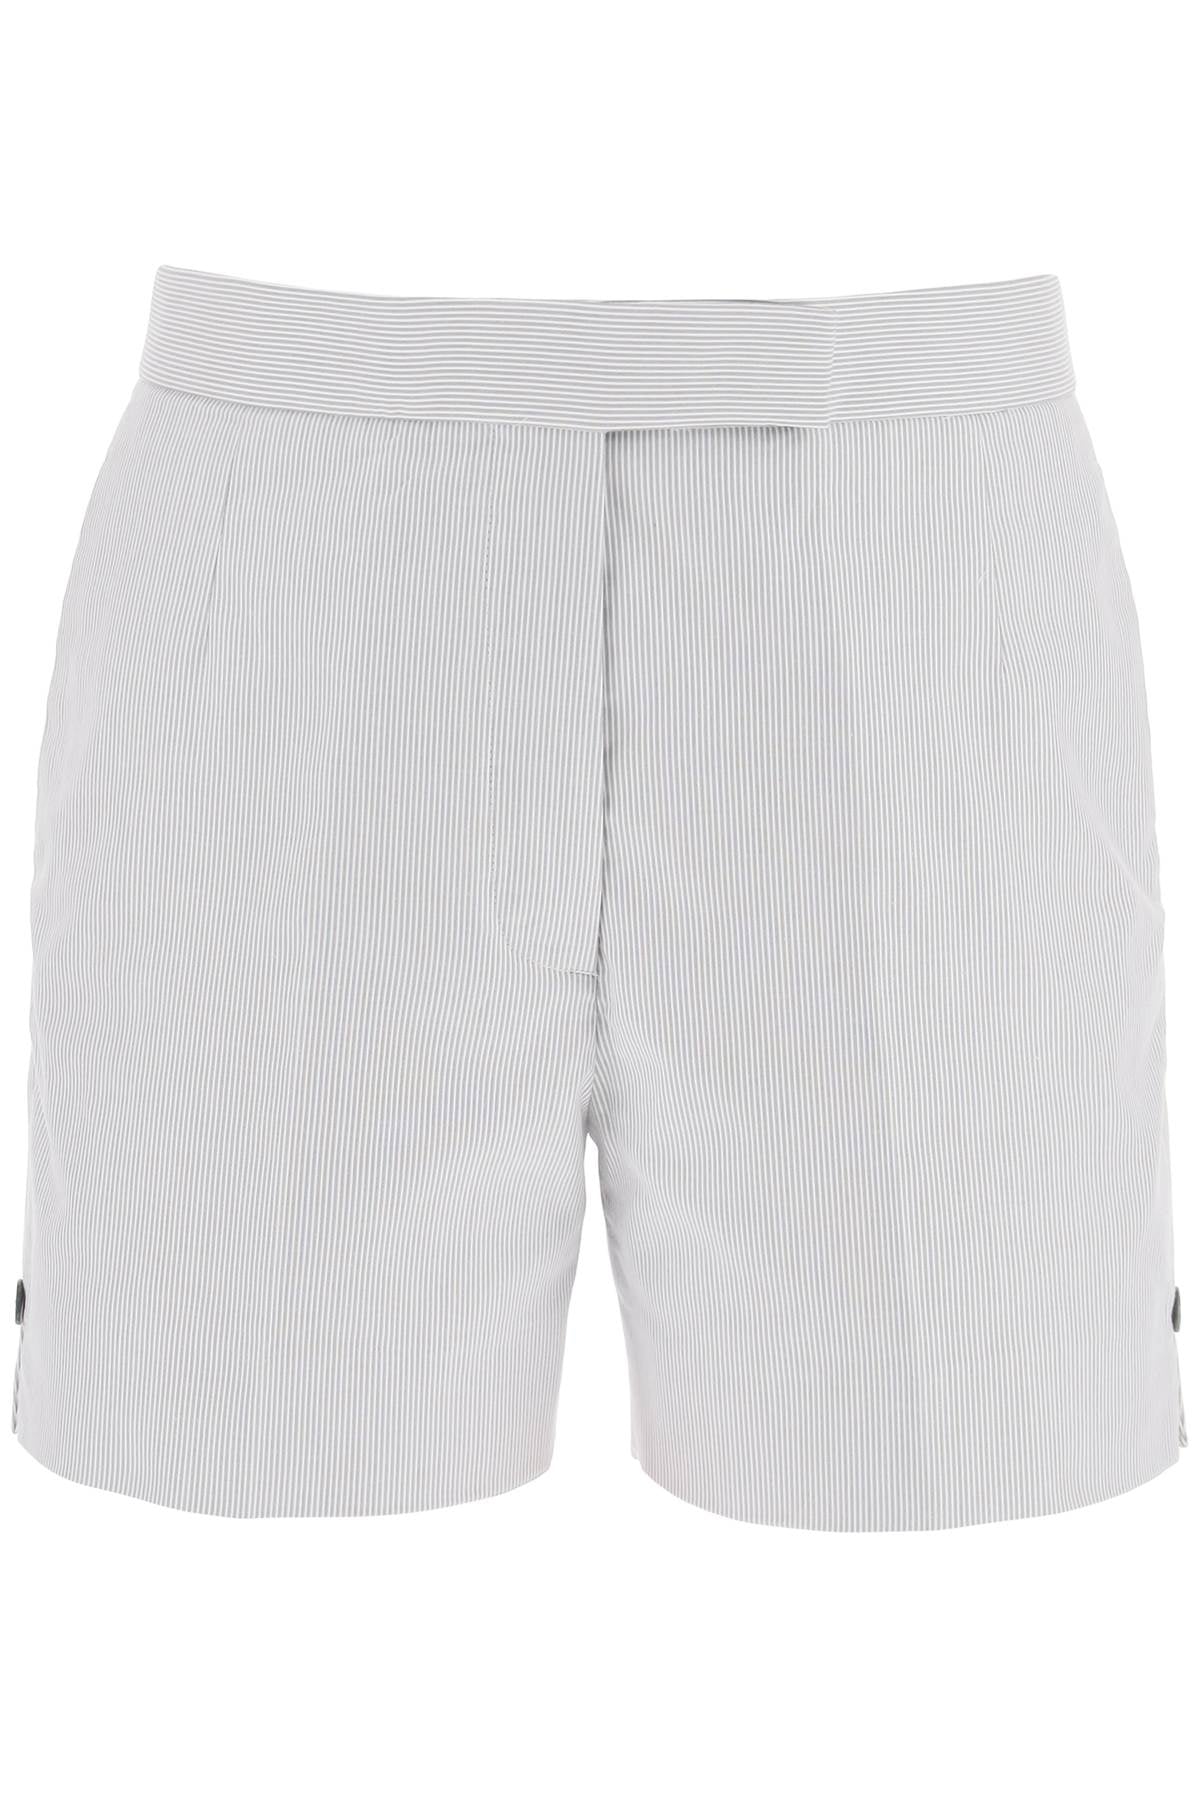 Thom browne shorts with pincord motif FTC468A06272 MED GREY